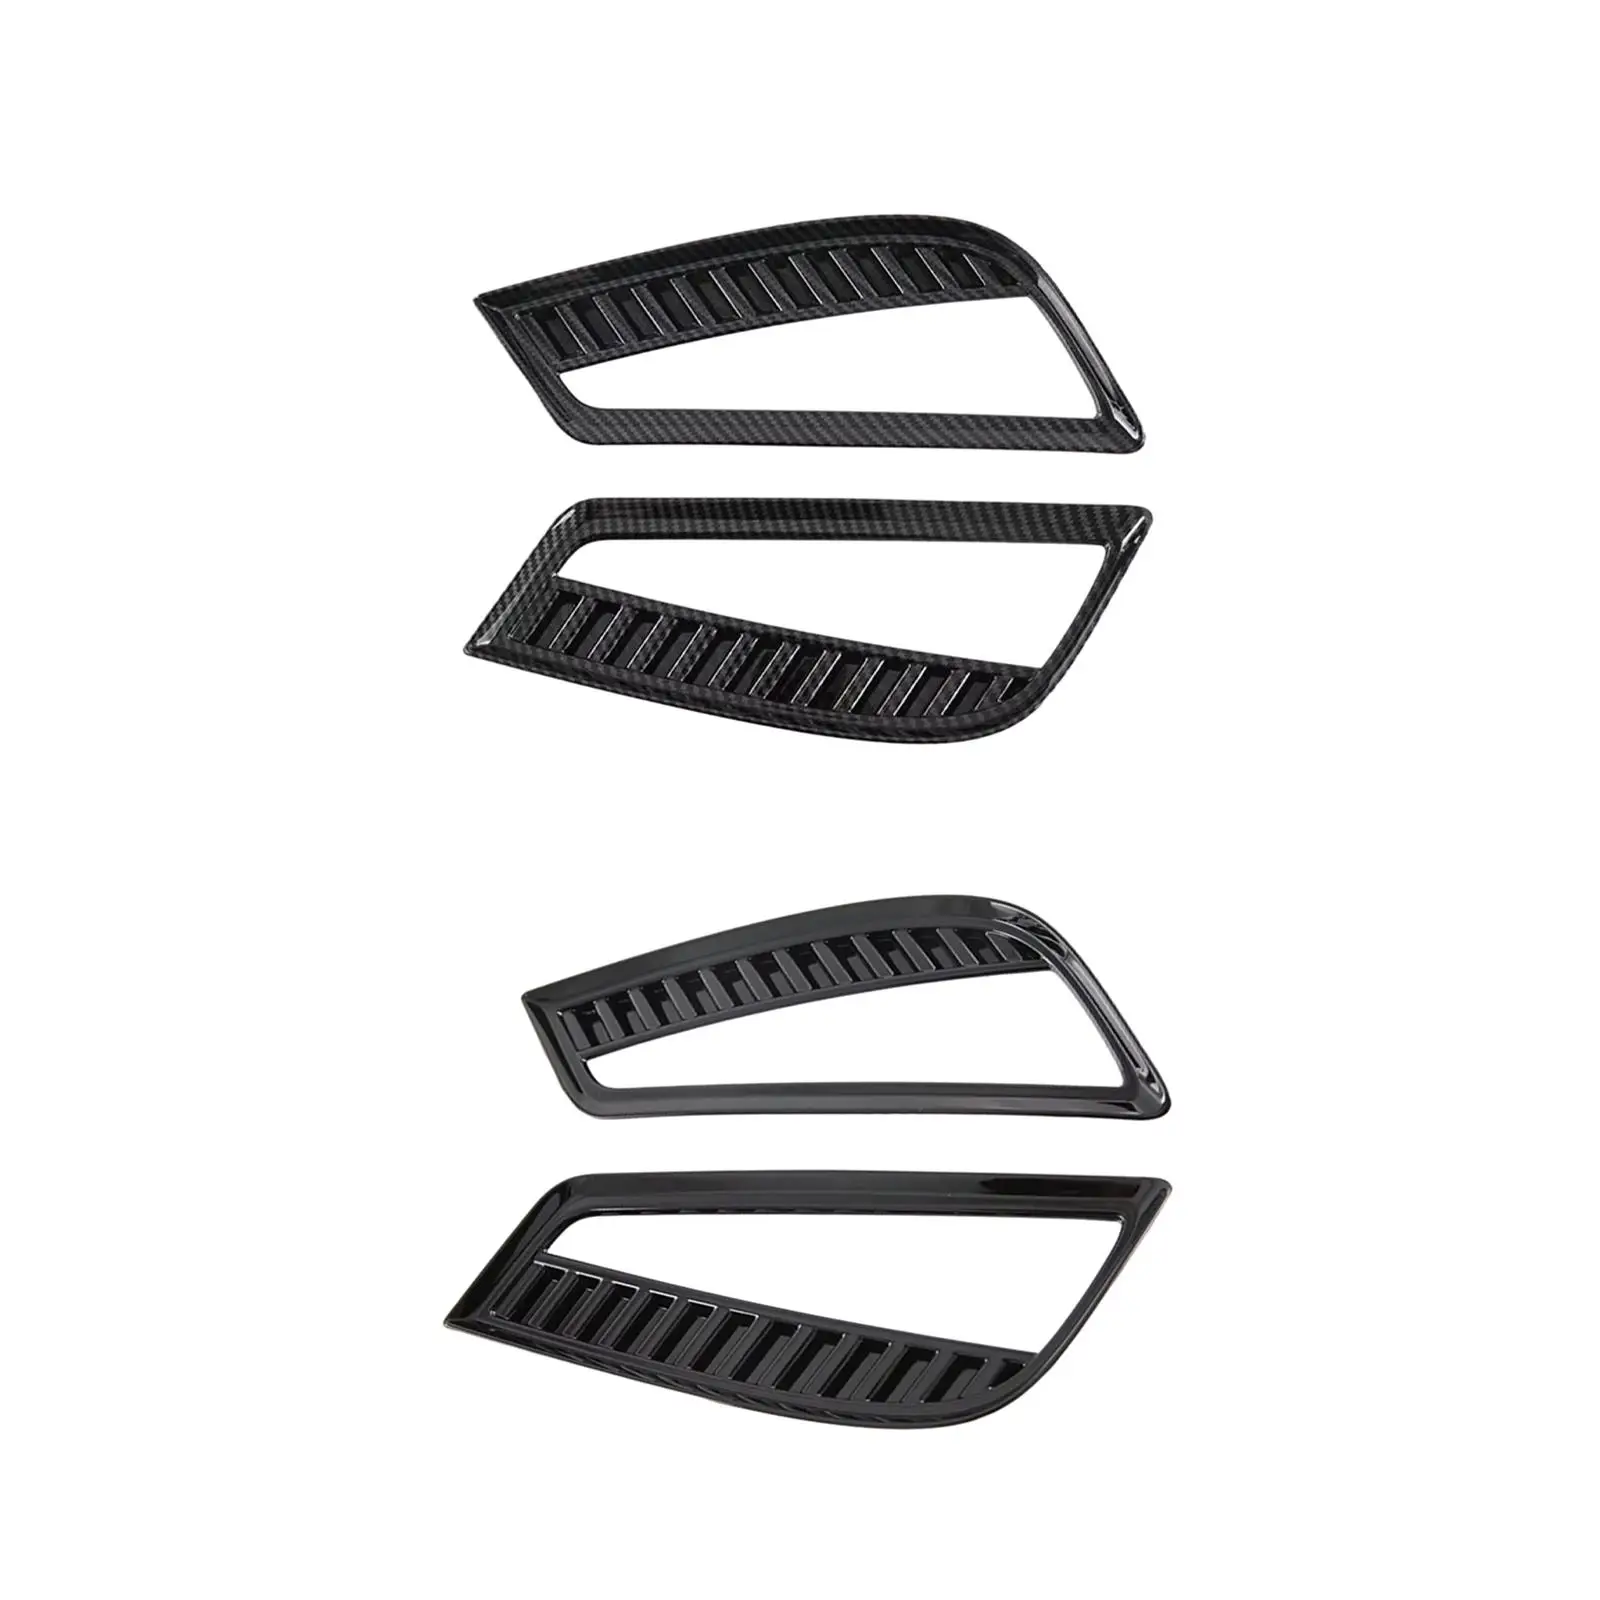 2x Rear Reflector Fog Lamp Cover Bezel Frame, Replacement Parts, Styling Durable